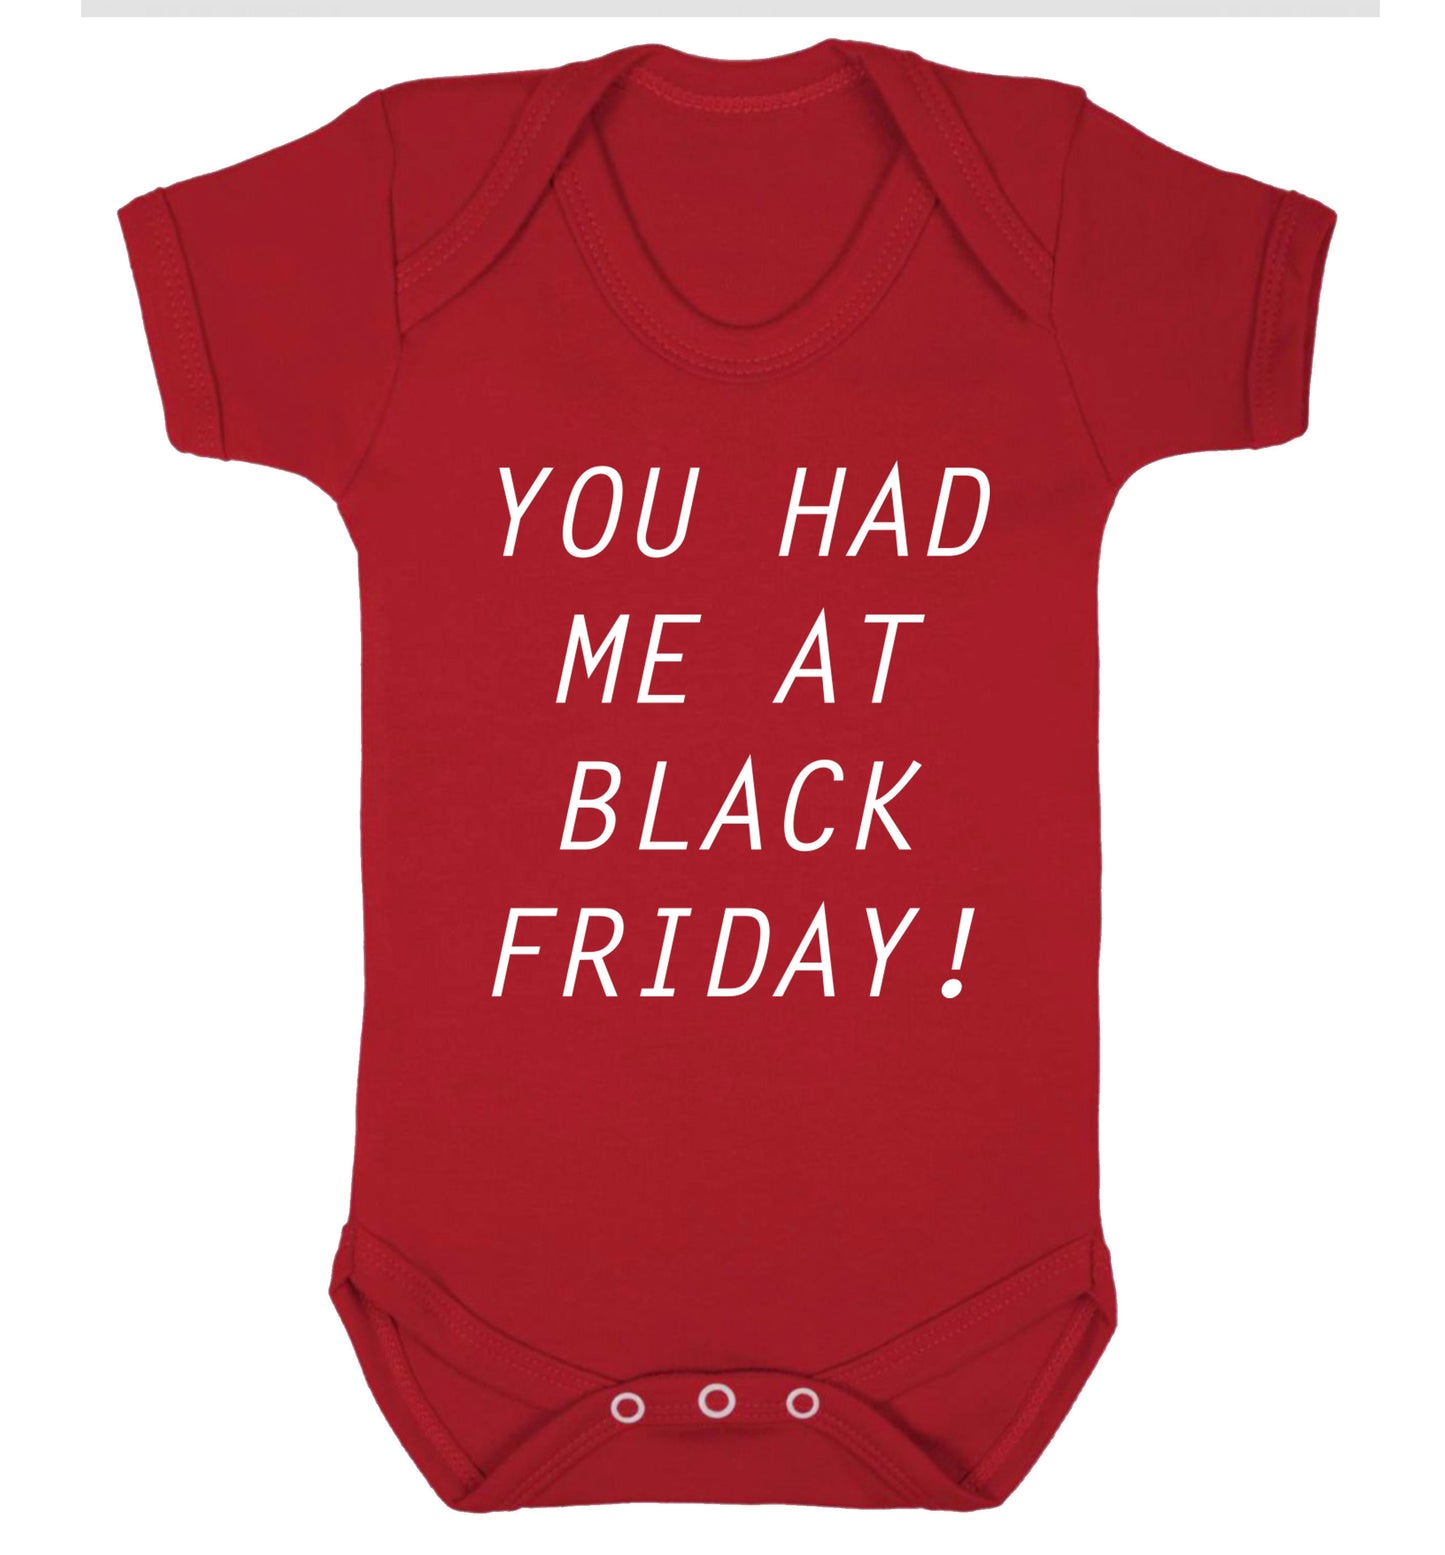 You had me at black friday Baby Vest red 18-24 months